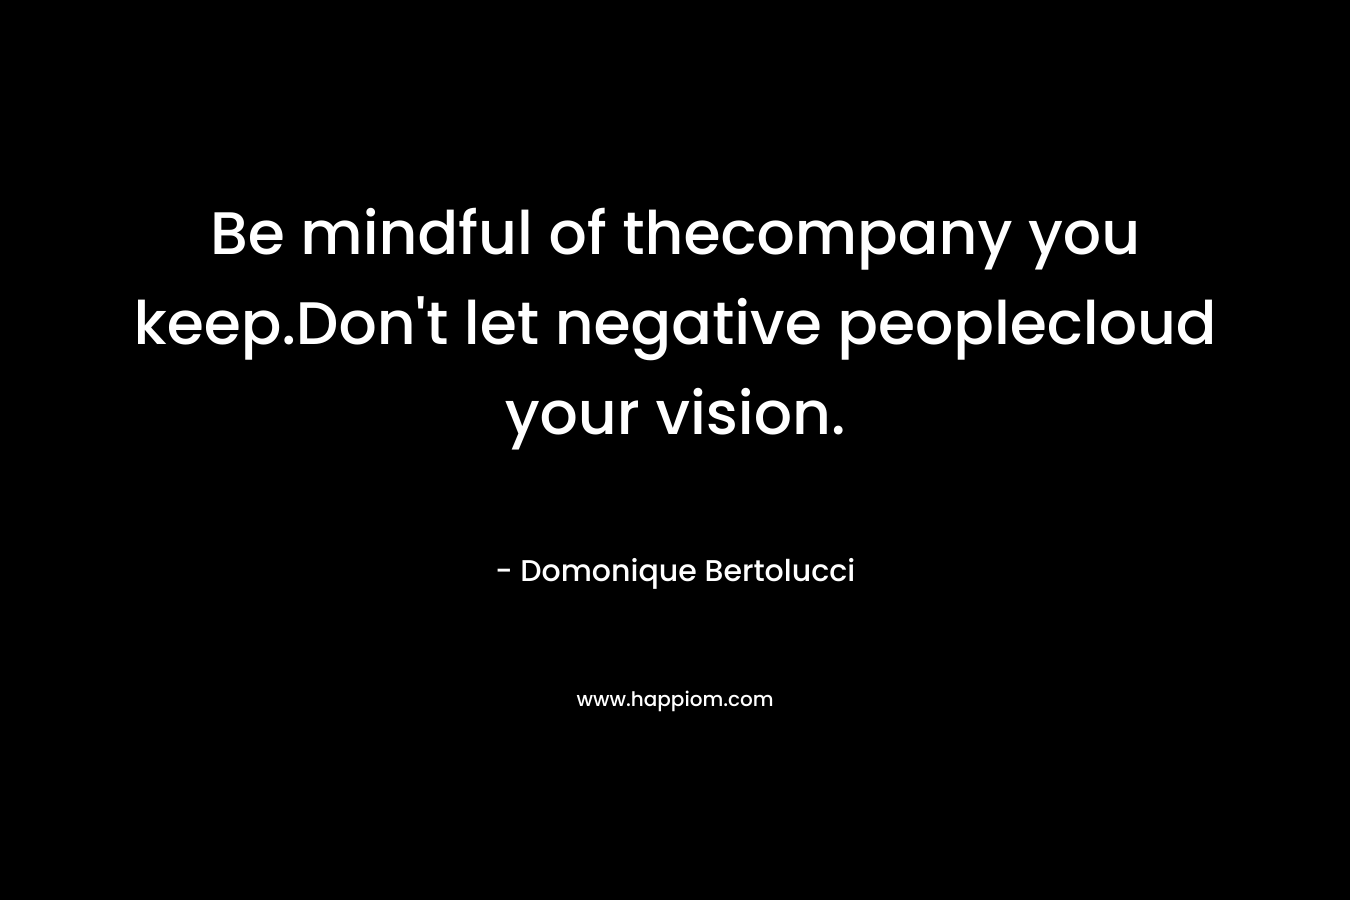 Be mindful of thecompany you keep.Don't let negative peoplecloud your vision.